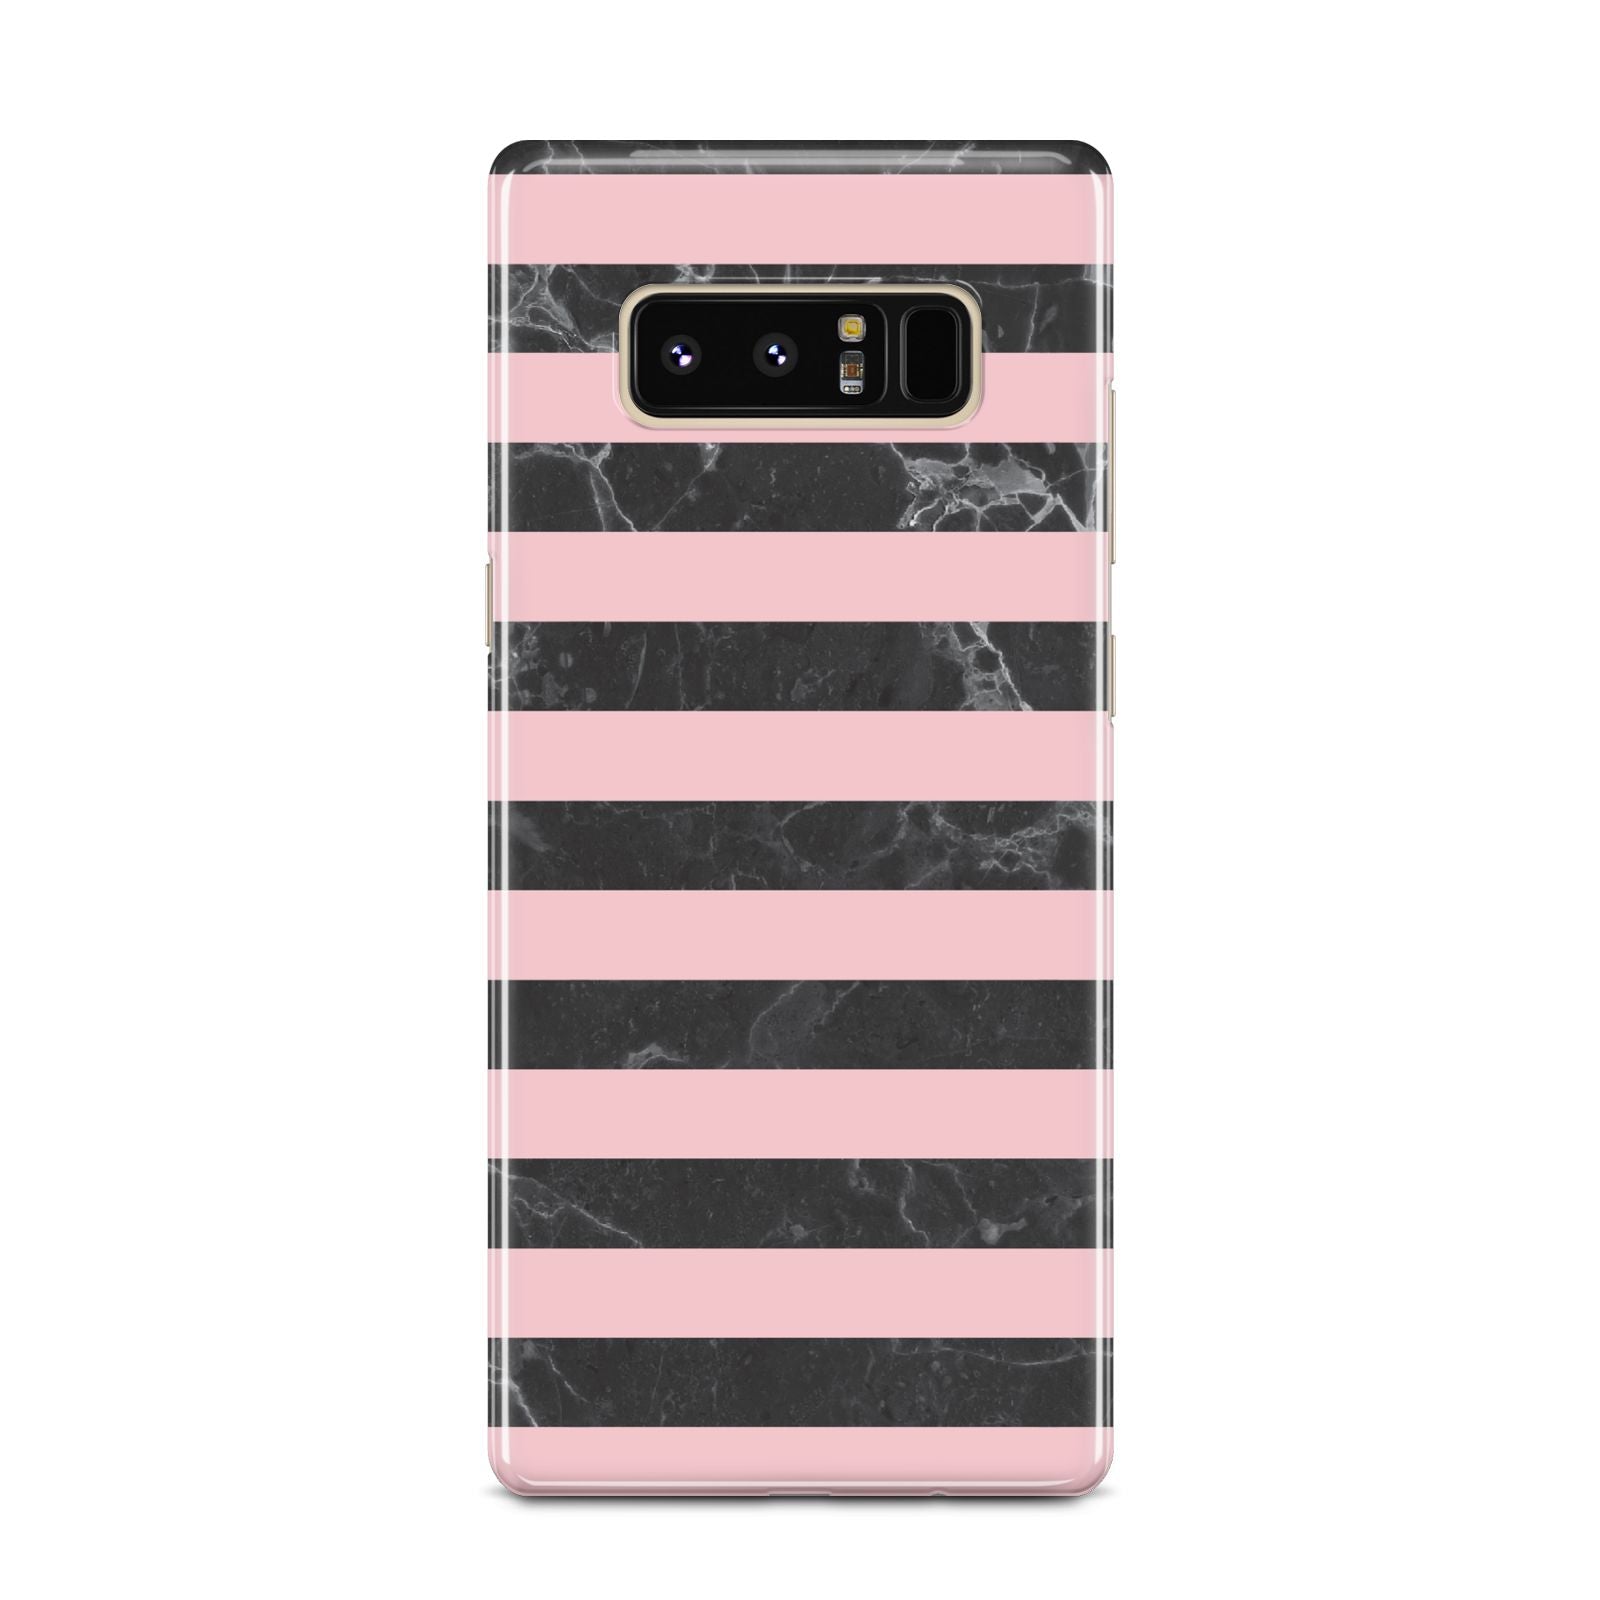 Marble Black Pink Striped Samsung Galaxy Note 8 Case